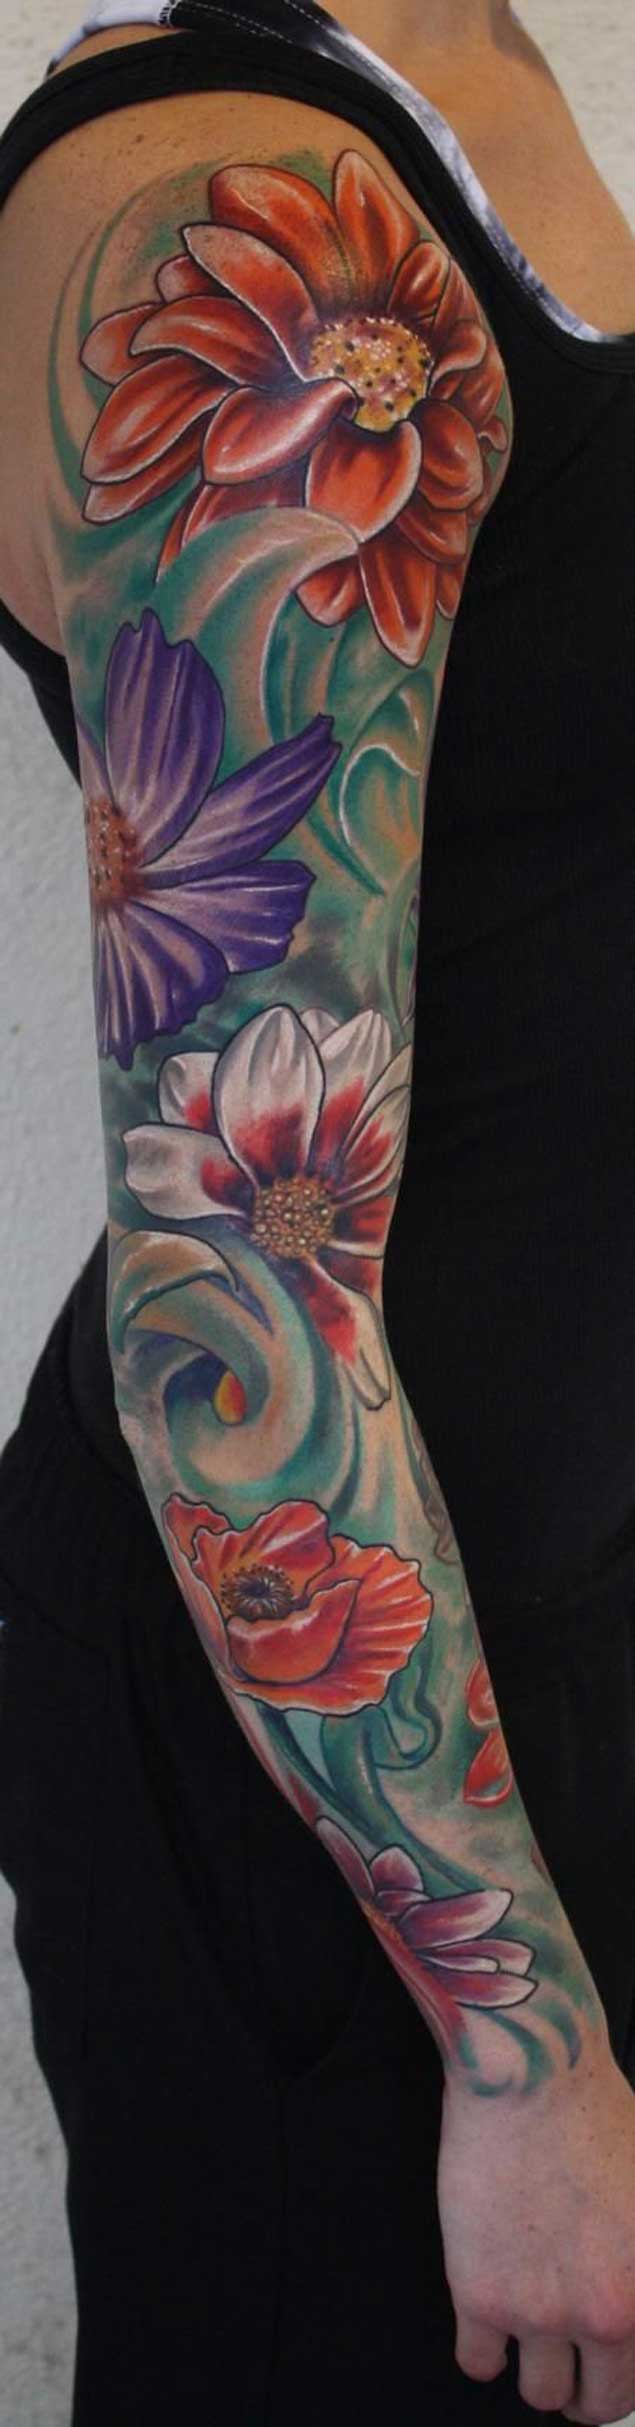 30 Fabulous Floral Sleeve Tattoos for Women - TattooBlend